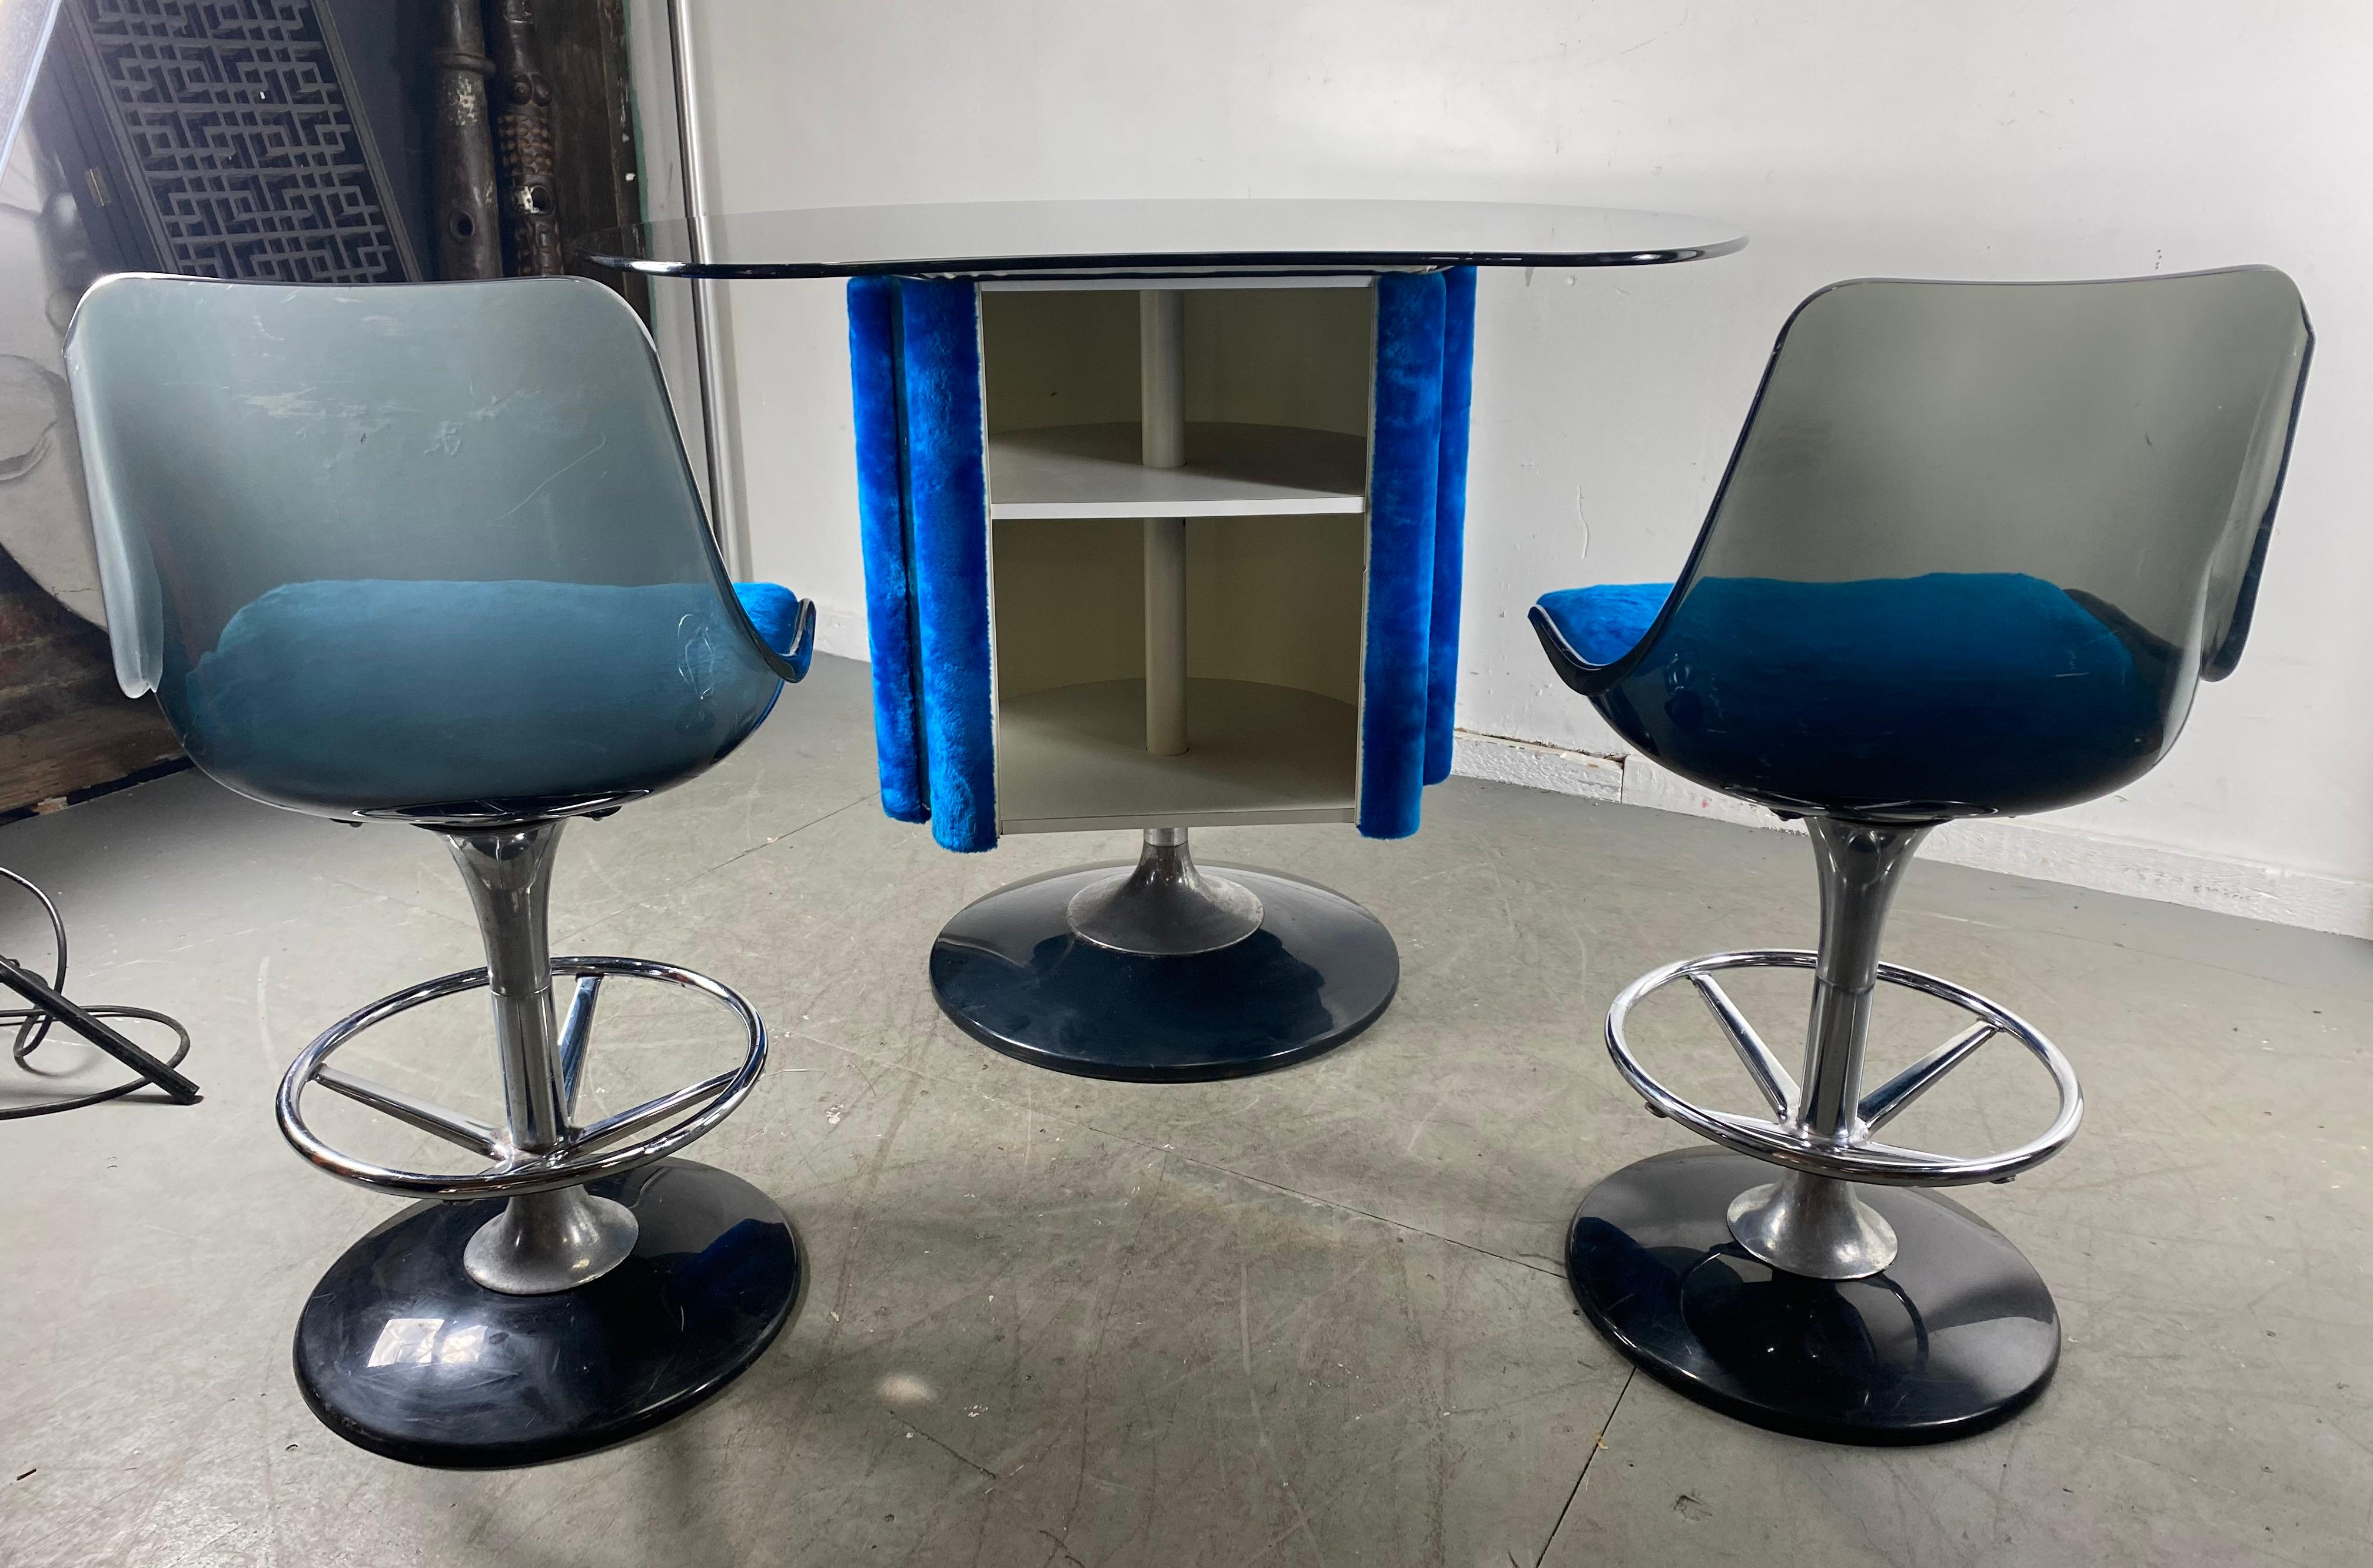 Late 20th Century 1970s Space Age Three-Piece Pedestal Dry Bar with Two Stools by Chrome Craft